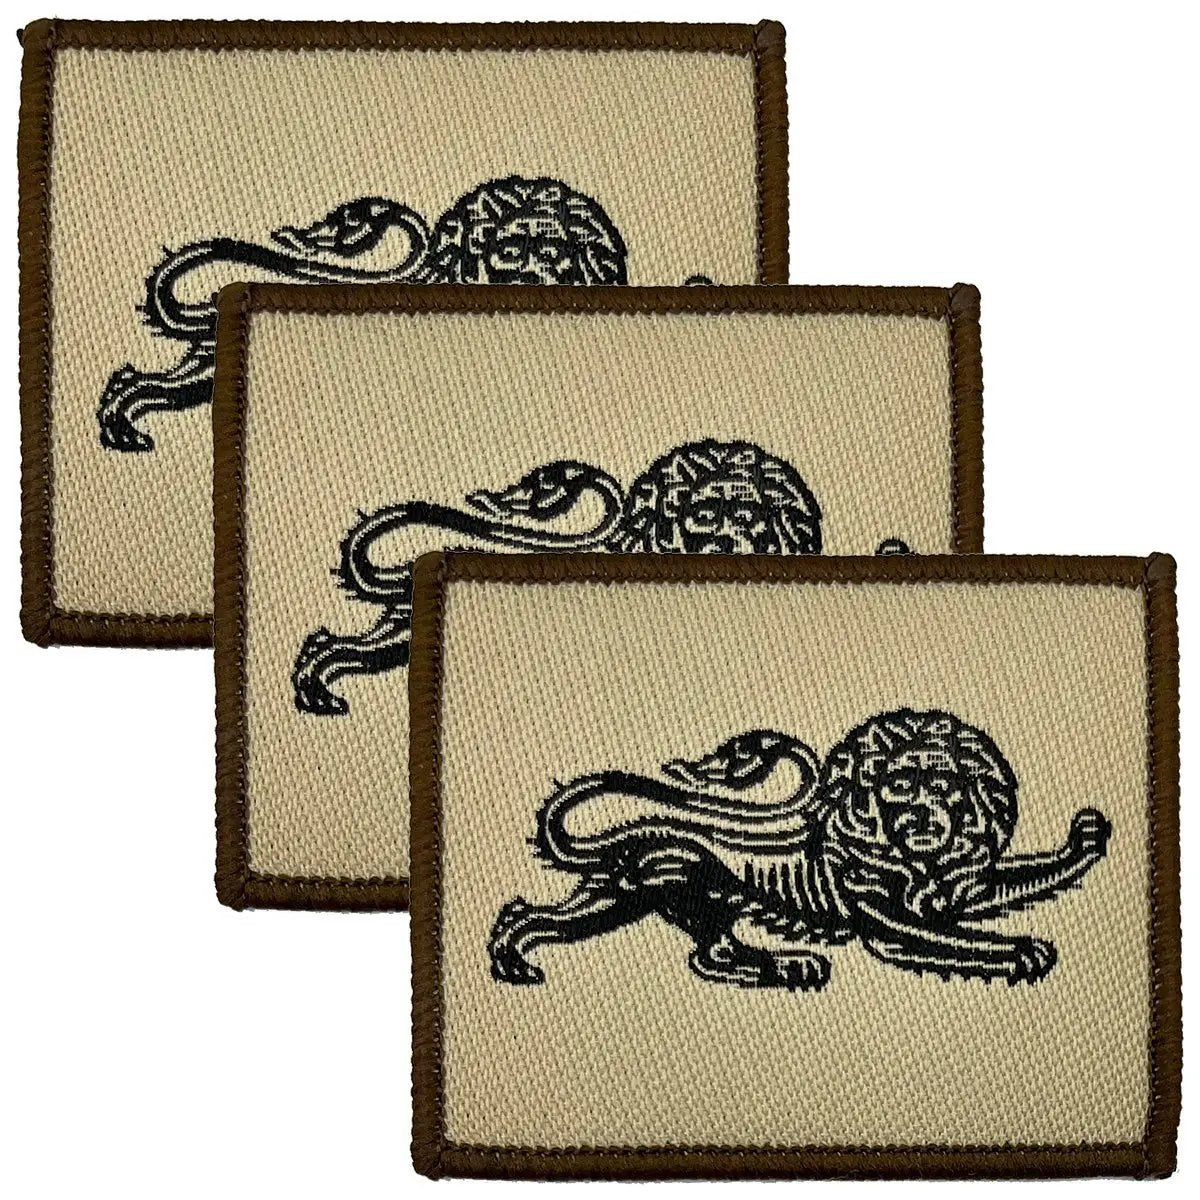 Duke of Lancasters TRF - Iron or Sewn On Patch - John Bull Clothing